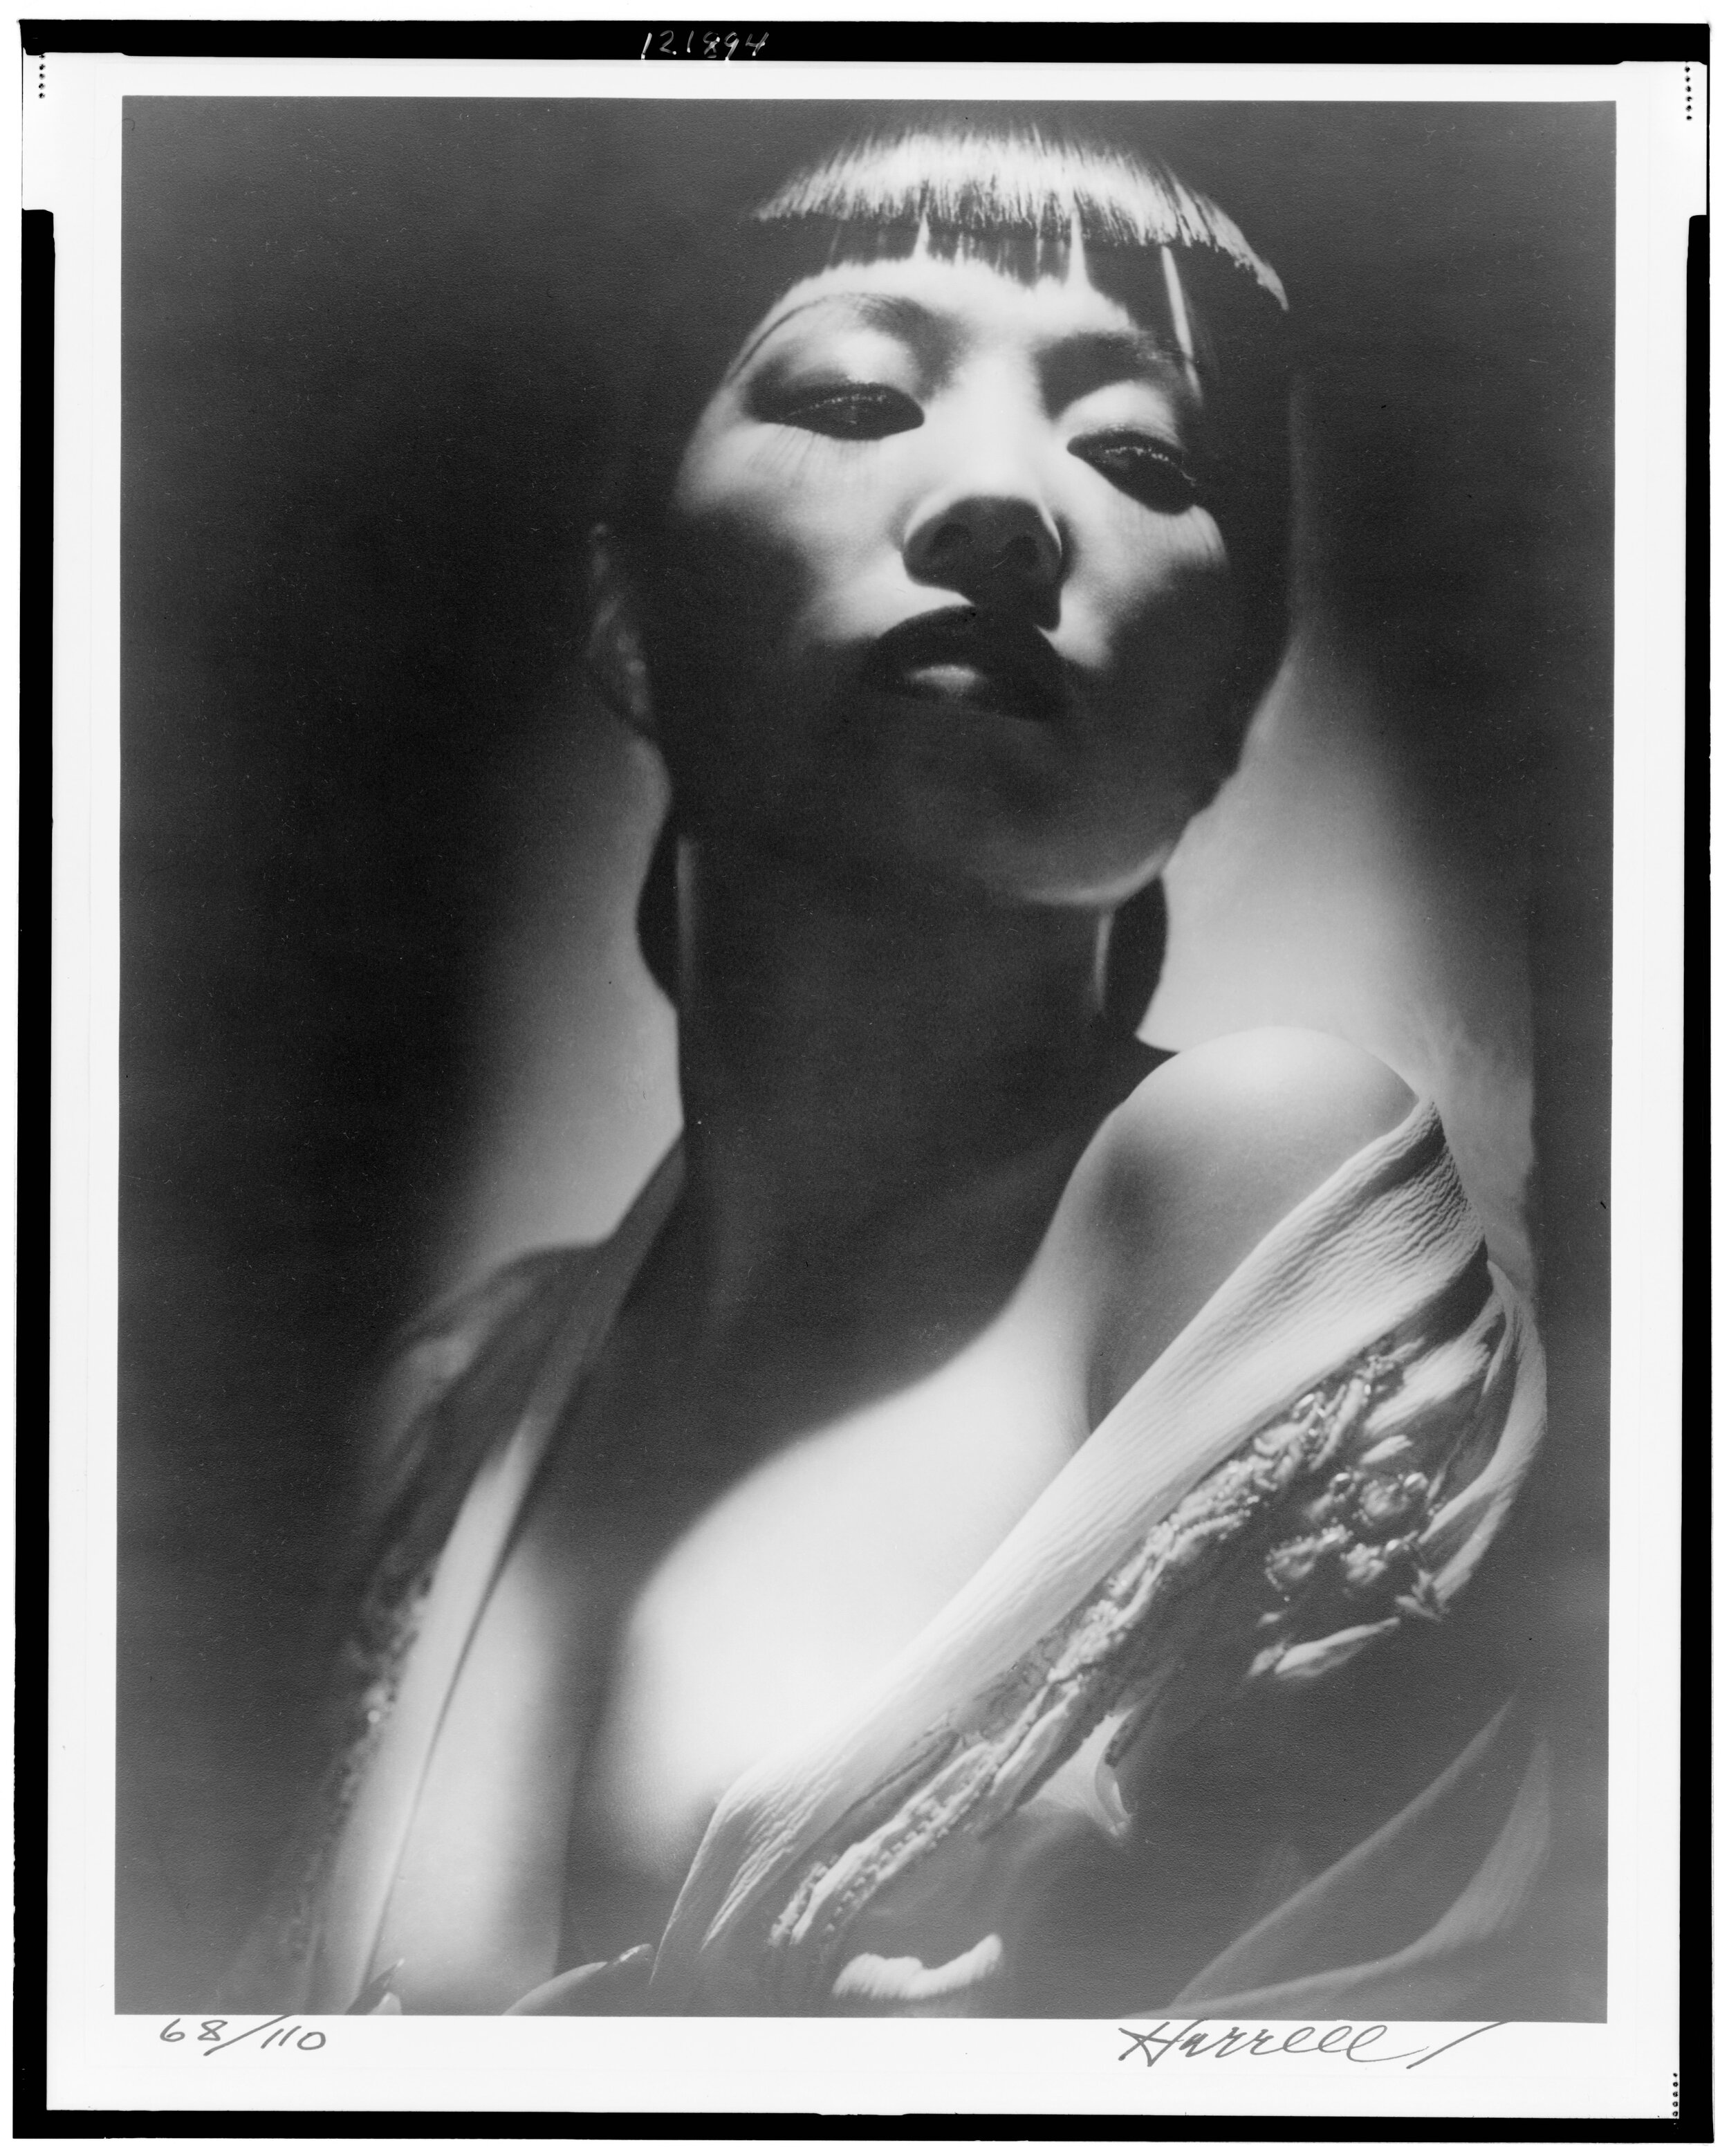  There’s always been an American fascinations with the Chinese “other.” Here’s Anna May Wong, the first non-white film star in the United States, in 1924. Wong’s overt sensuality mesmerized (and scandalized) audiences in American and China. One of he